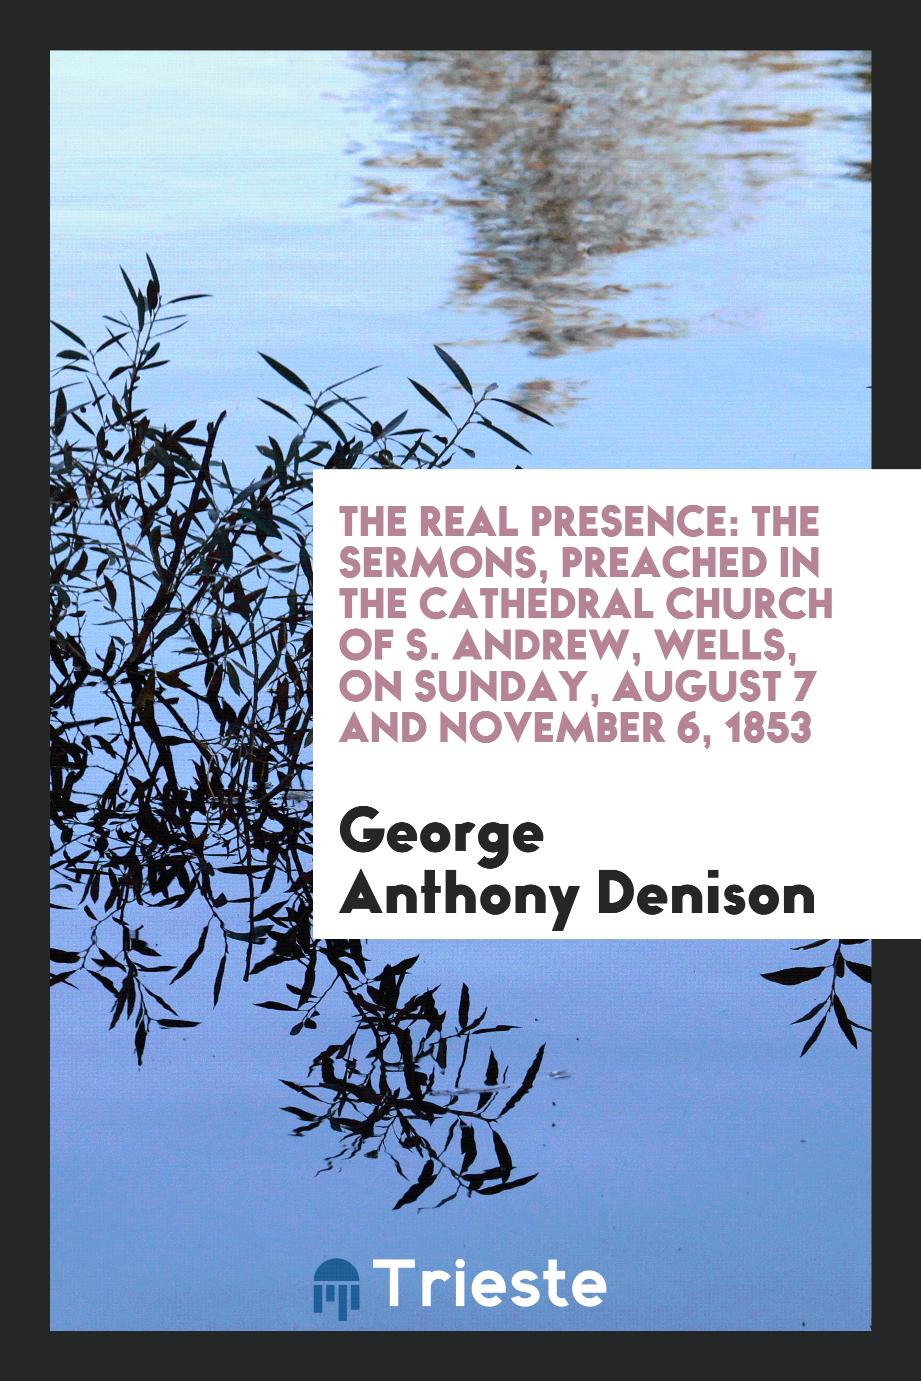 The Real Presence: The Sermons, Preached in the Cathedral Church of S. Andrew, Wells, on Sunday, August 7 and November 6, 1853